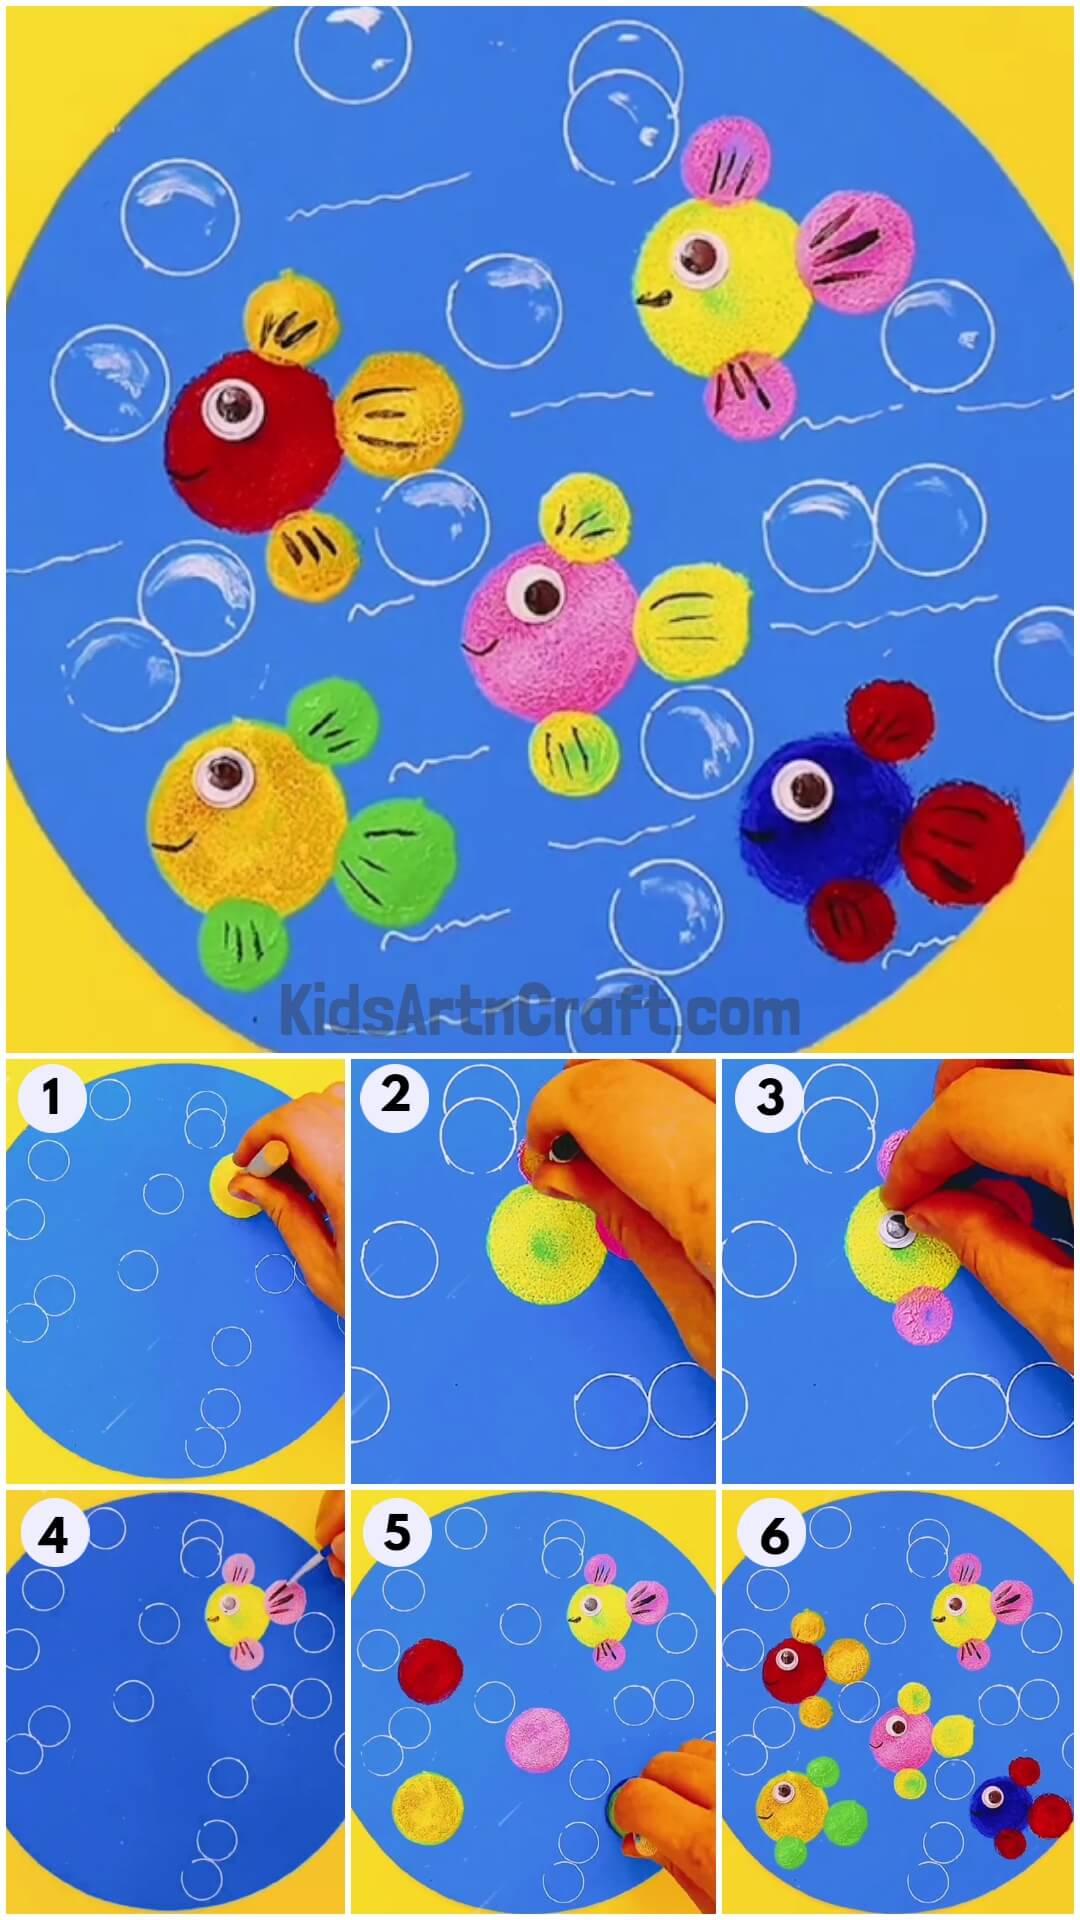 Colorful Stamping Fishes Underwater Artwork Idea For Kids